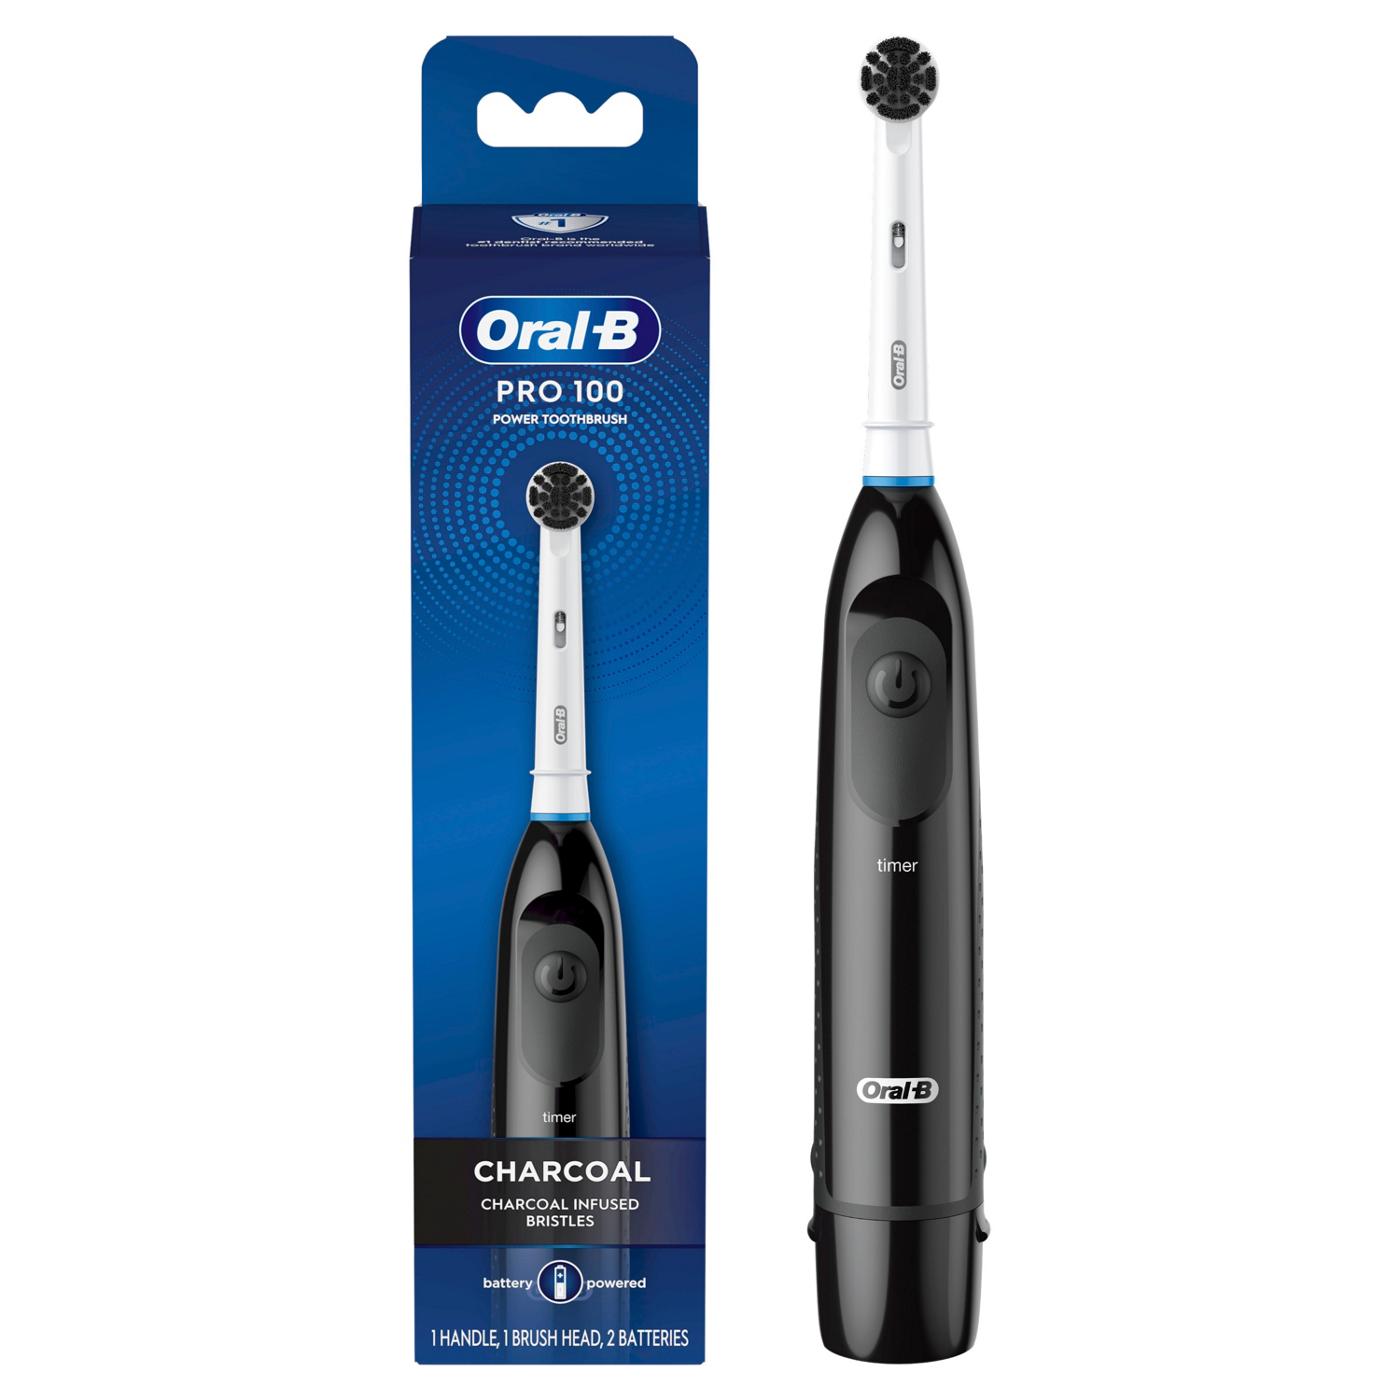 Oral-B Charcoal Clinical Battery Powered Toothbrush; image 3 of 3